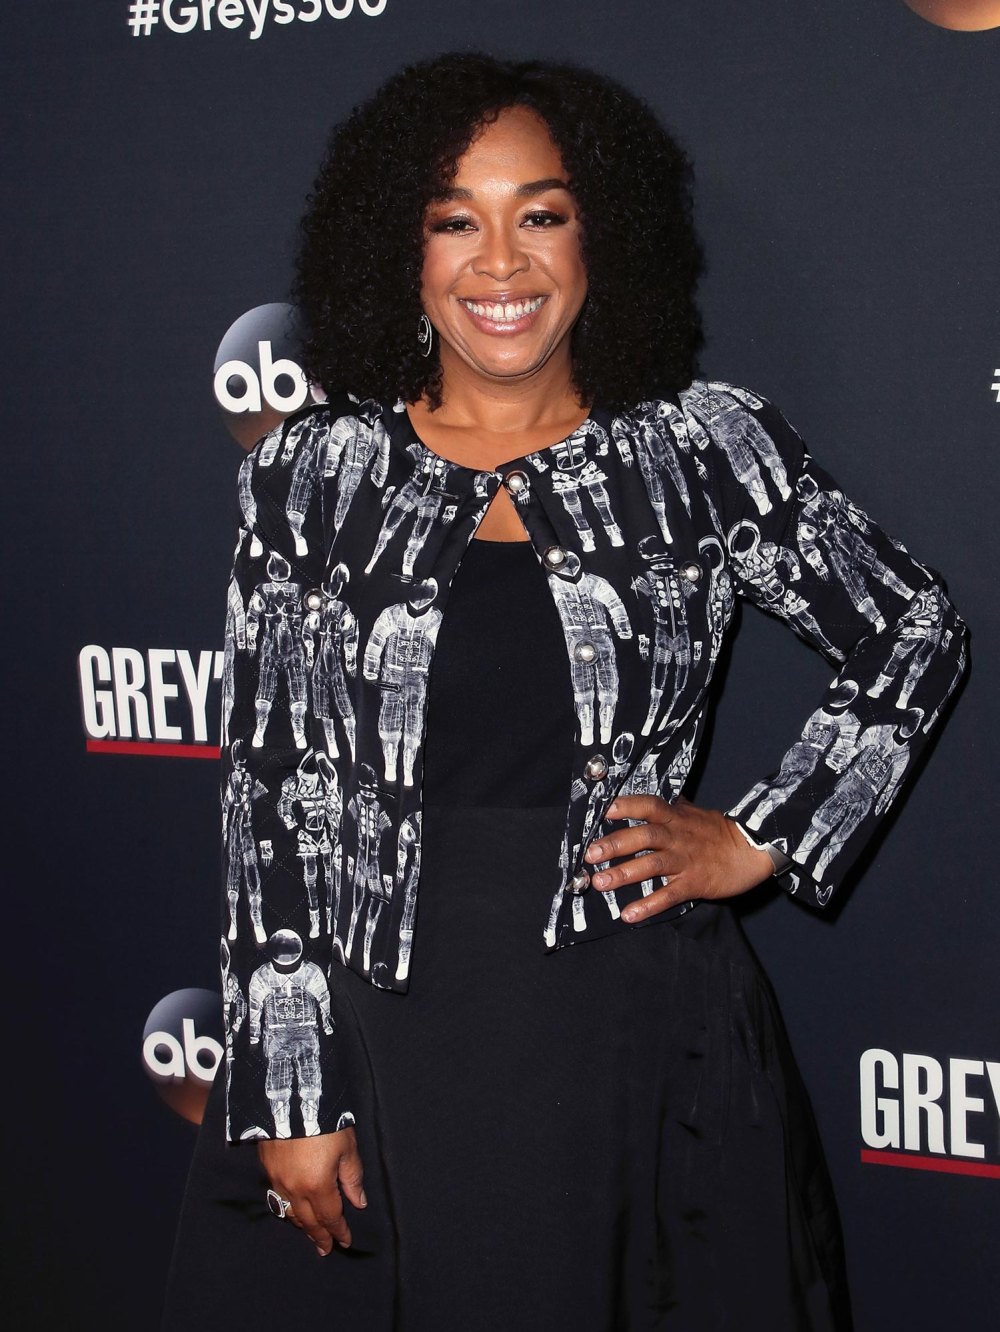 Shonda Rhimes Explains Why She Hired Security After Greys Anatomy Finales